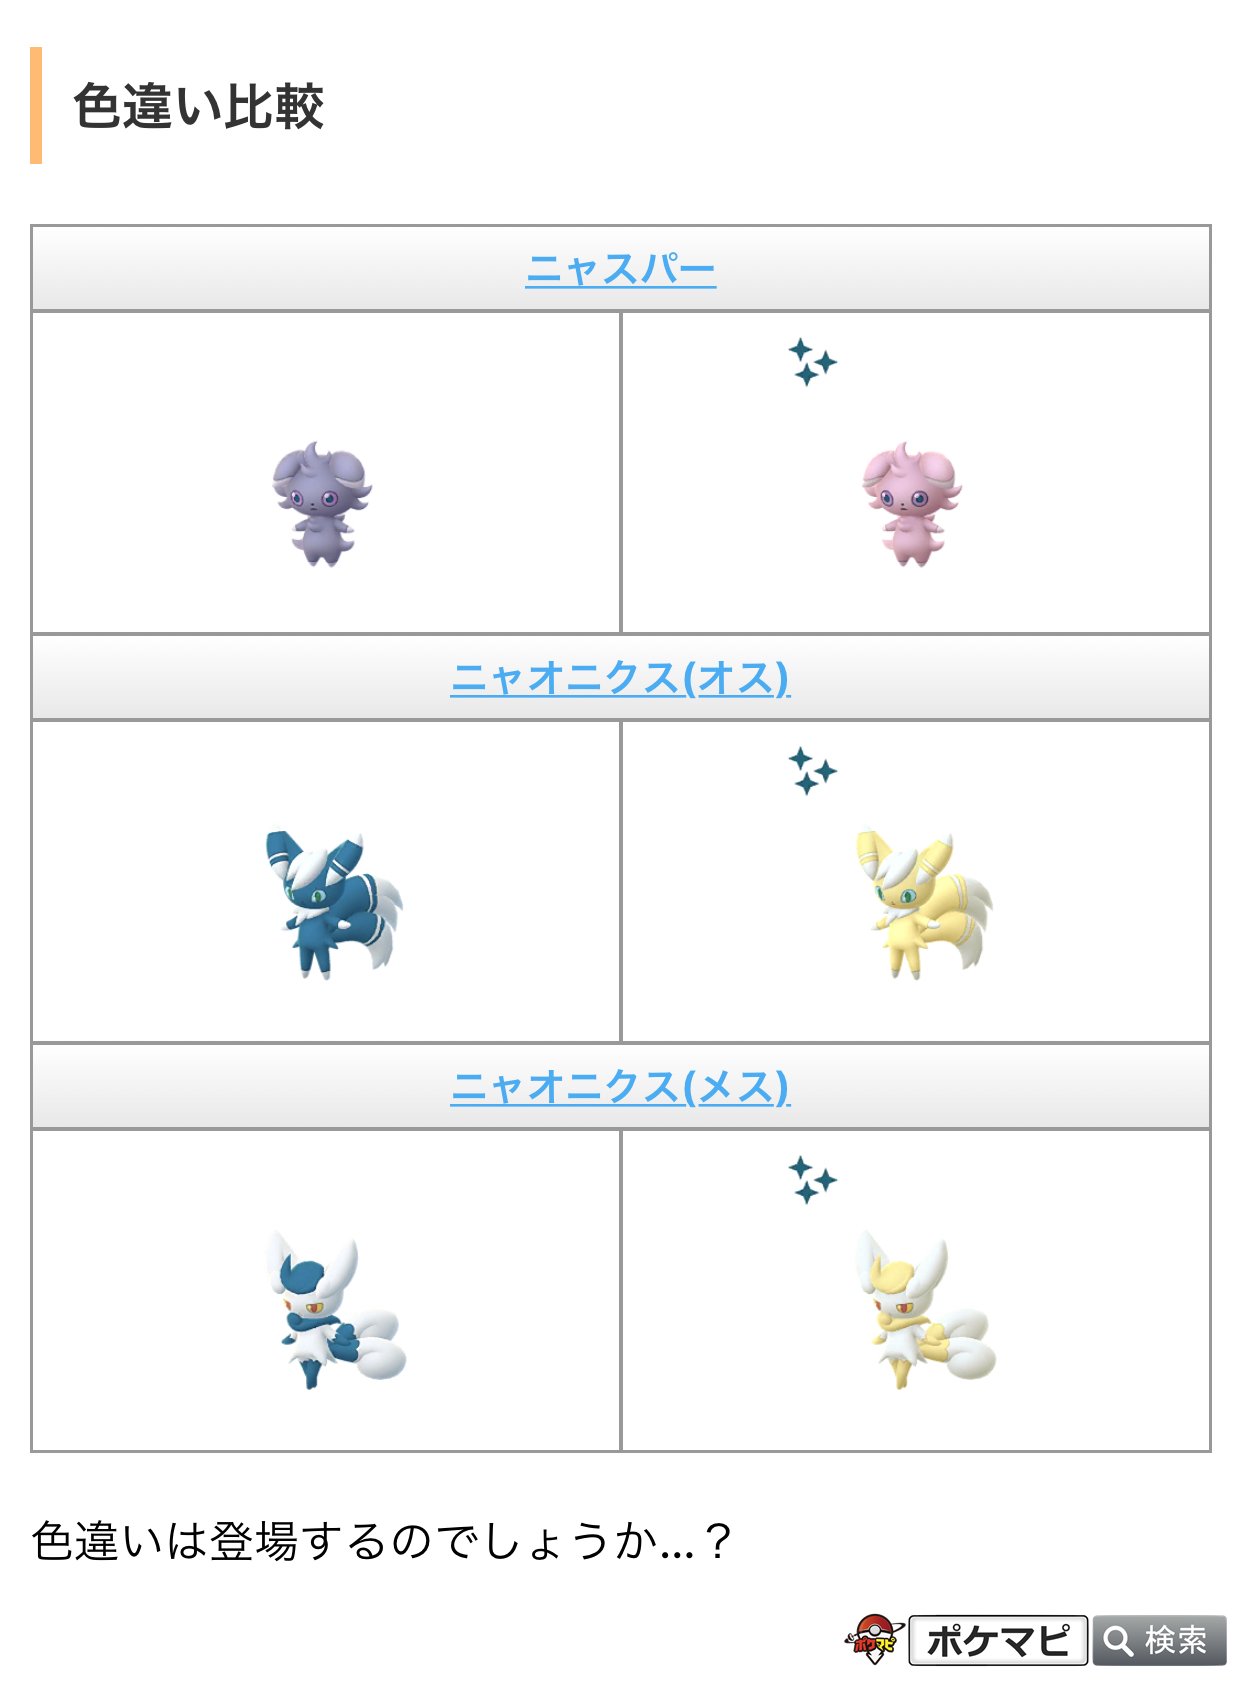 Auraguardian Nice Shiny Of Espurr ニャスパー And Meowstic ニャオニクス Male And Female If This Release Will Be Great Kick Off Generation 6 T Co Wjcpqrablg Twitter